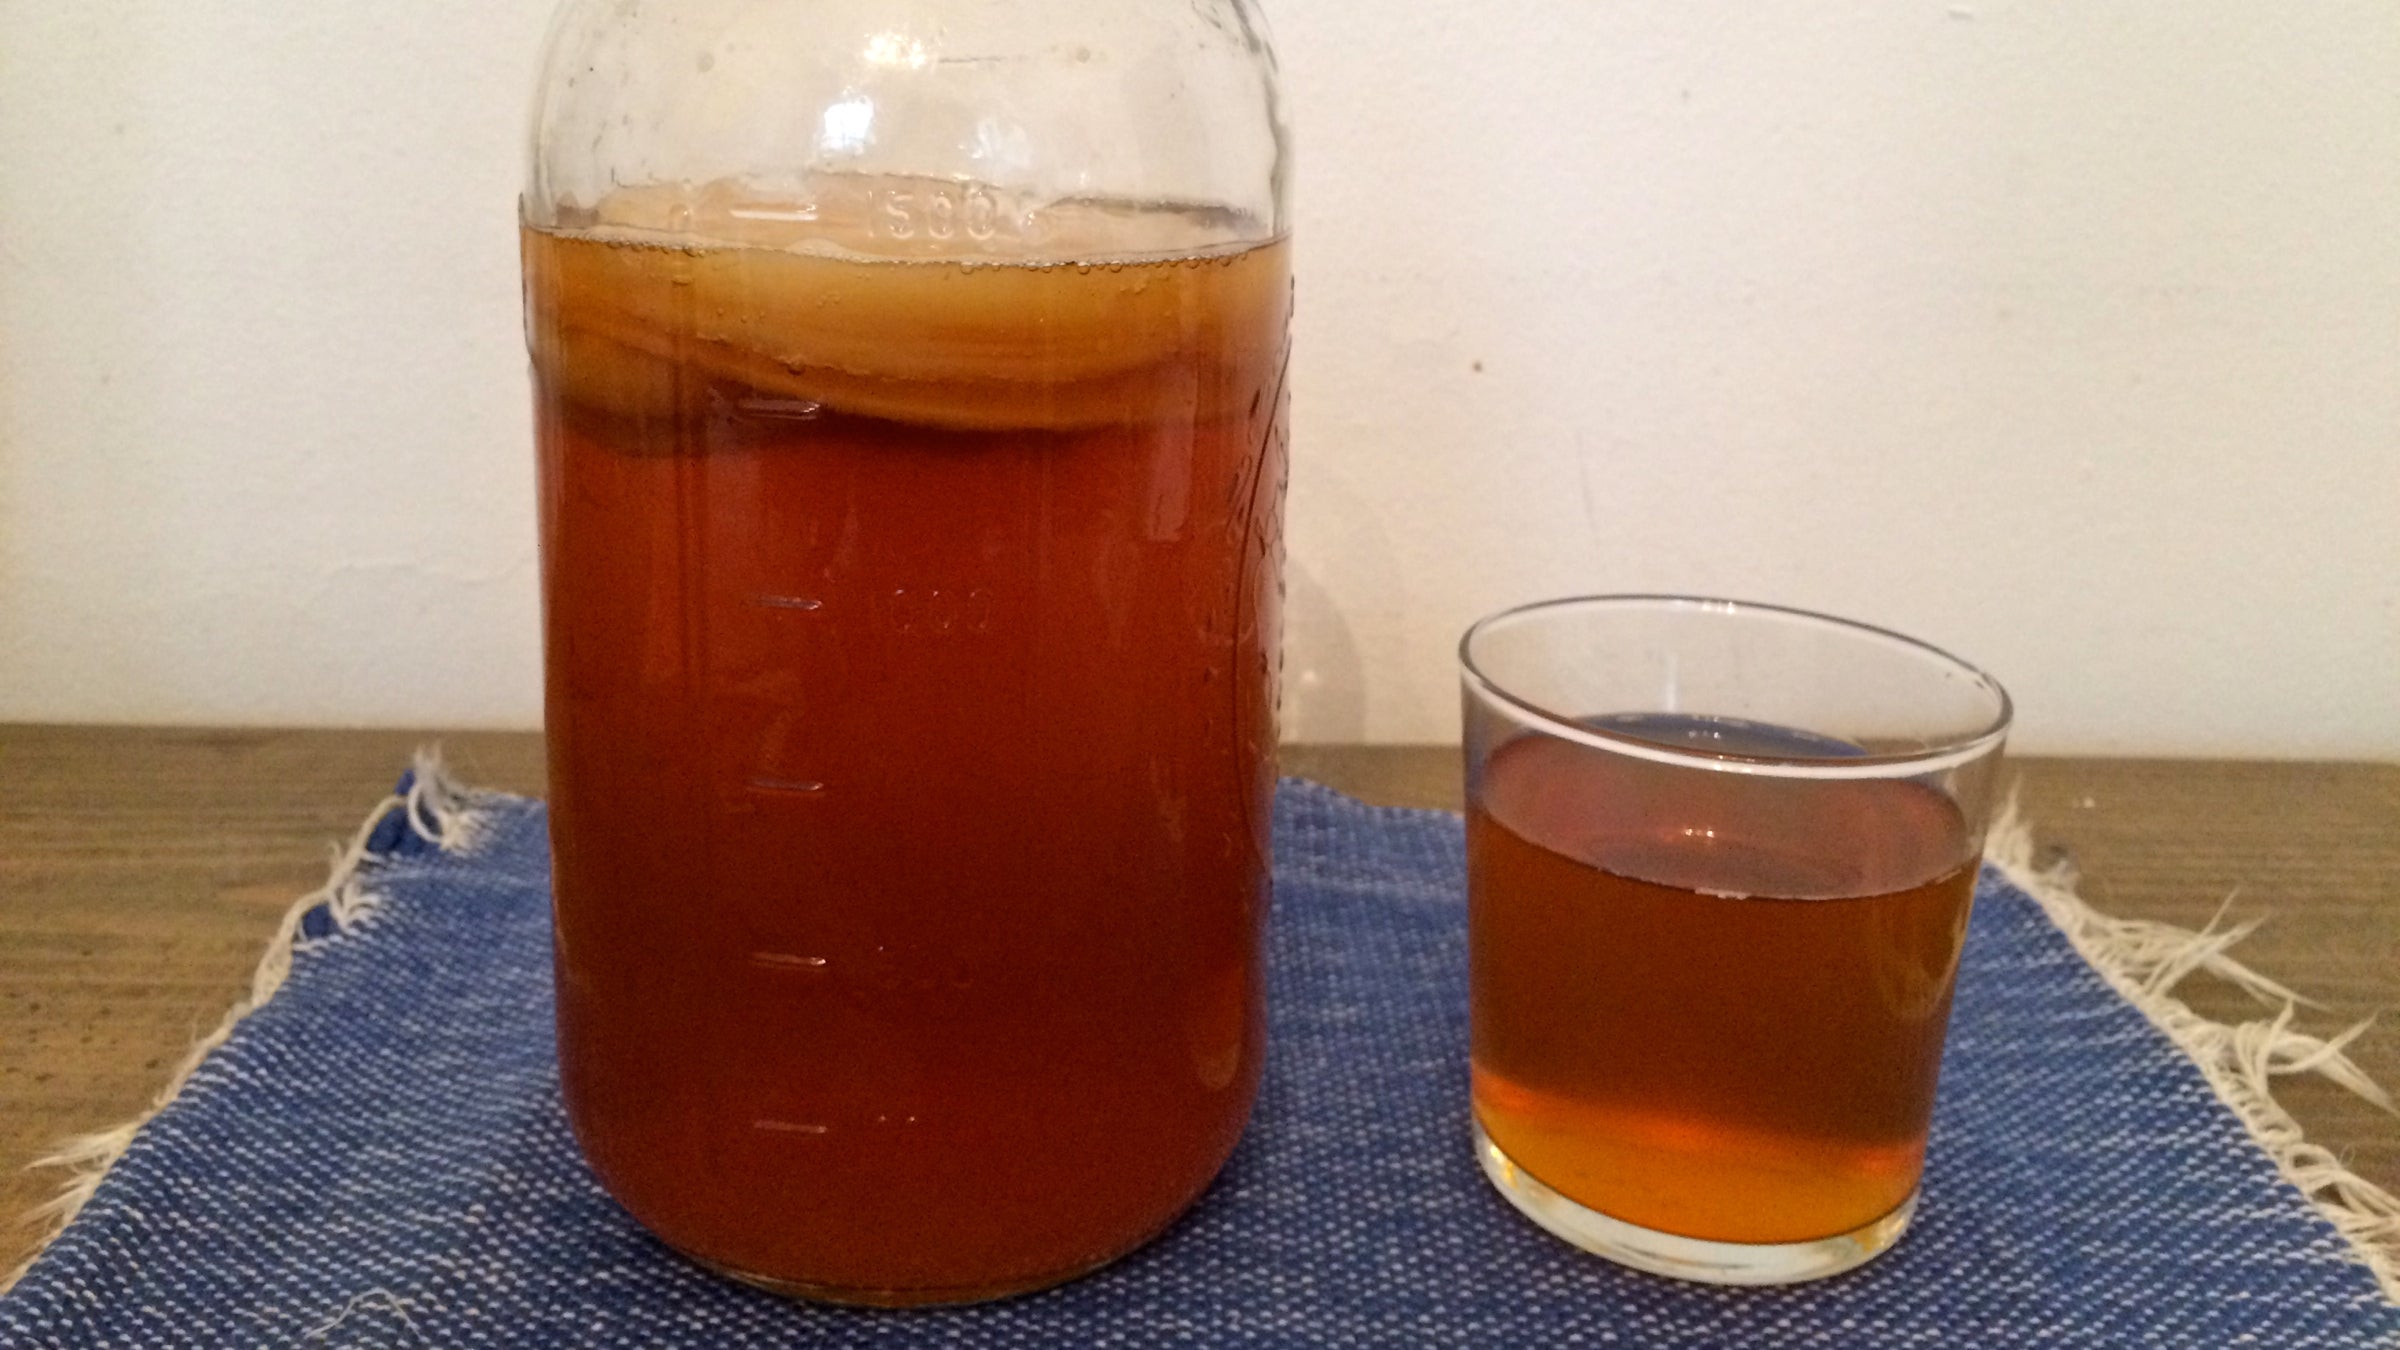 In the past 20 years kombucha has exploded in popularity. (Shaina Gates/WHYY)